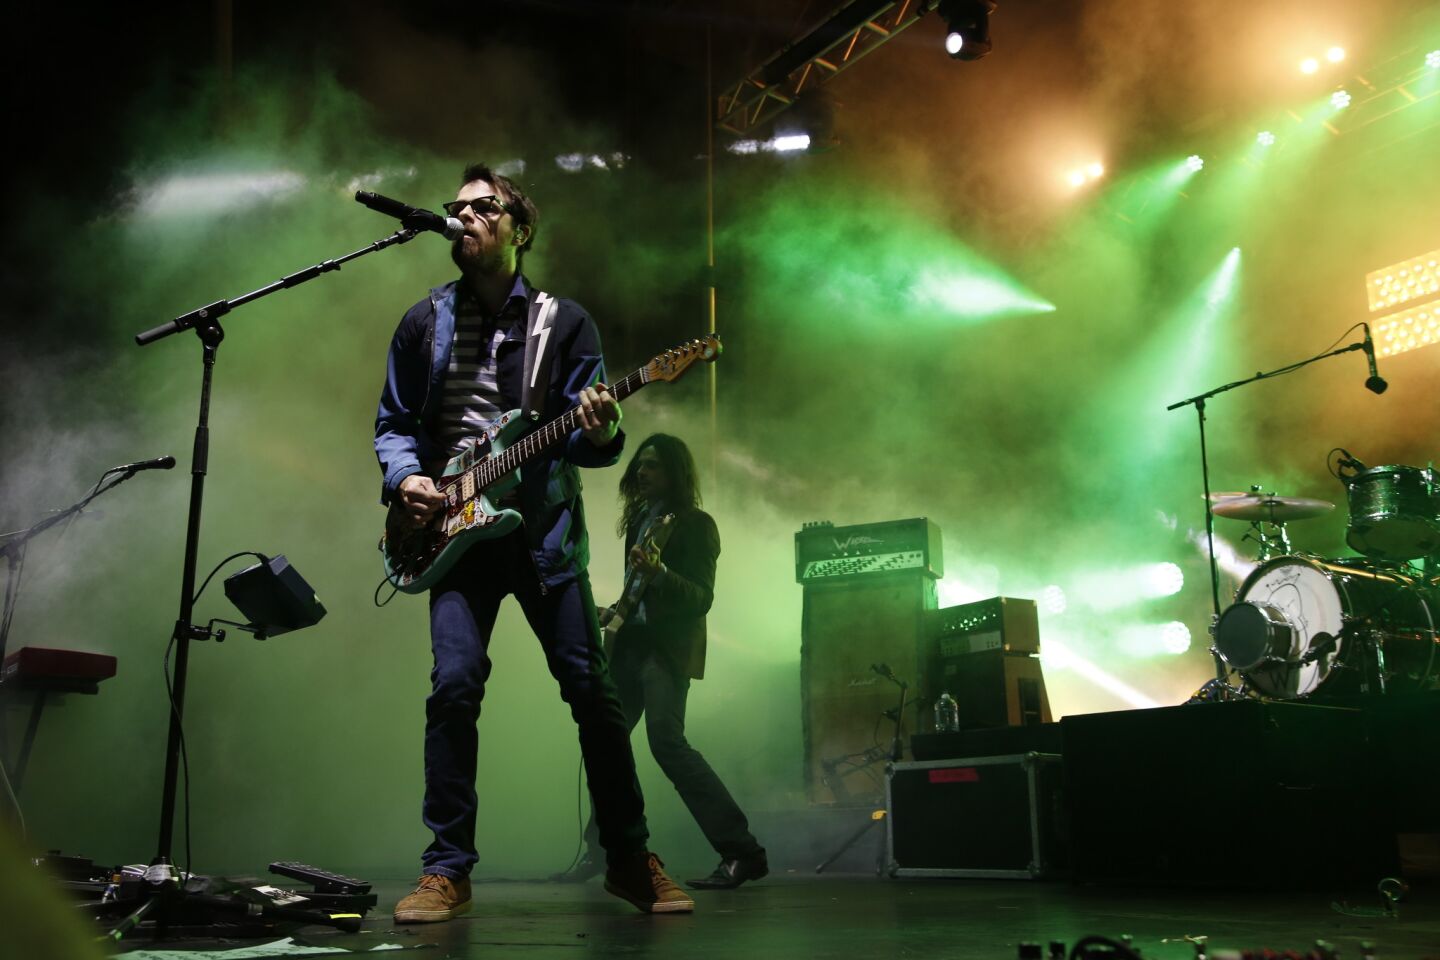 Rivers Cuomo of Weezer performs with his band at Burgerama on March 28. Weezer was one of the headliners for the two-day festival at Santa Ana's Observatory.